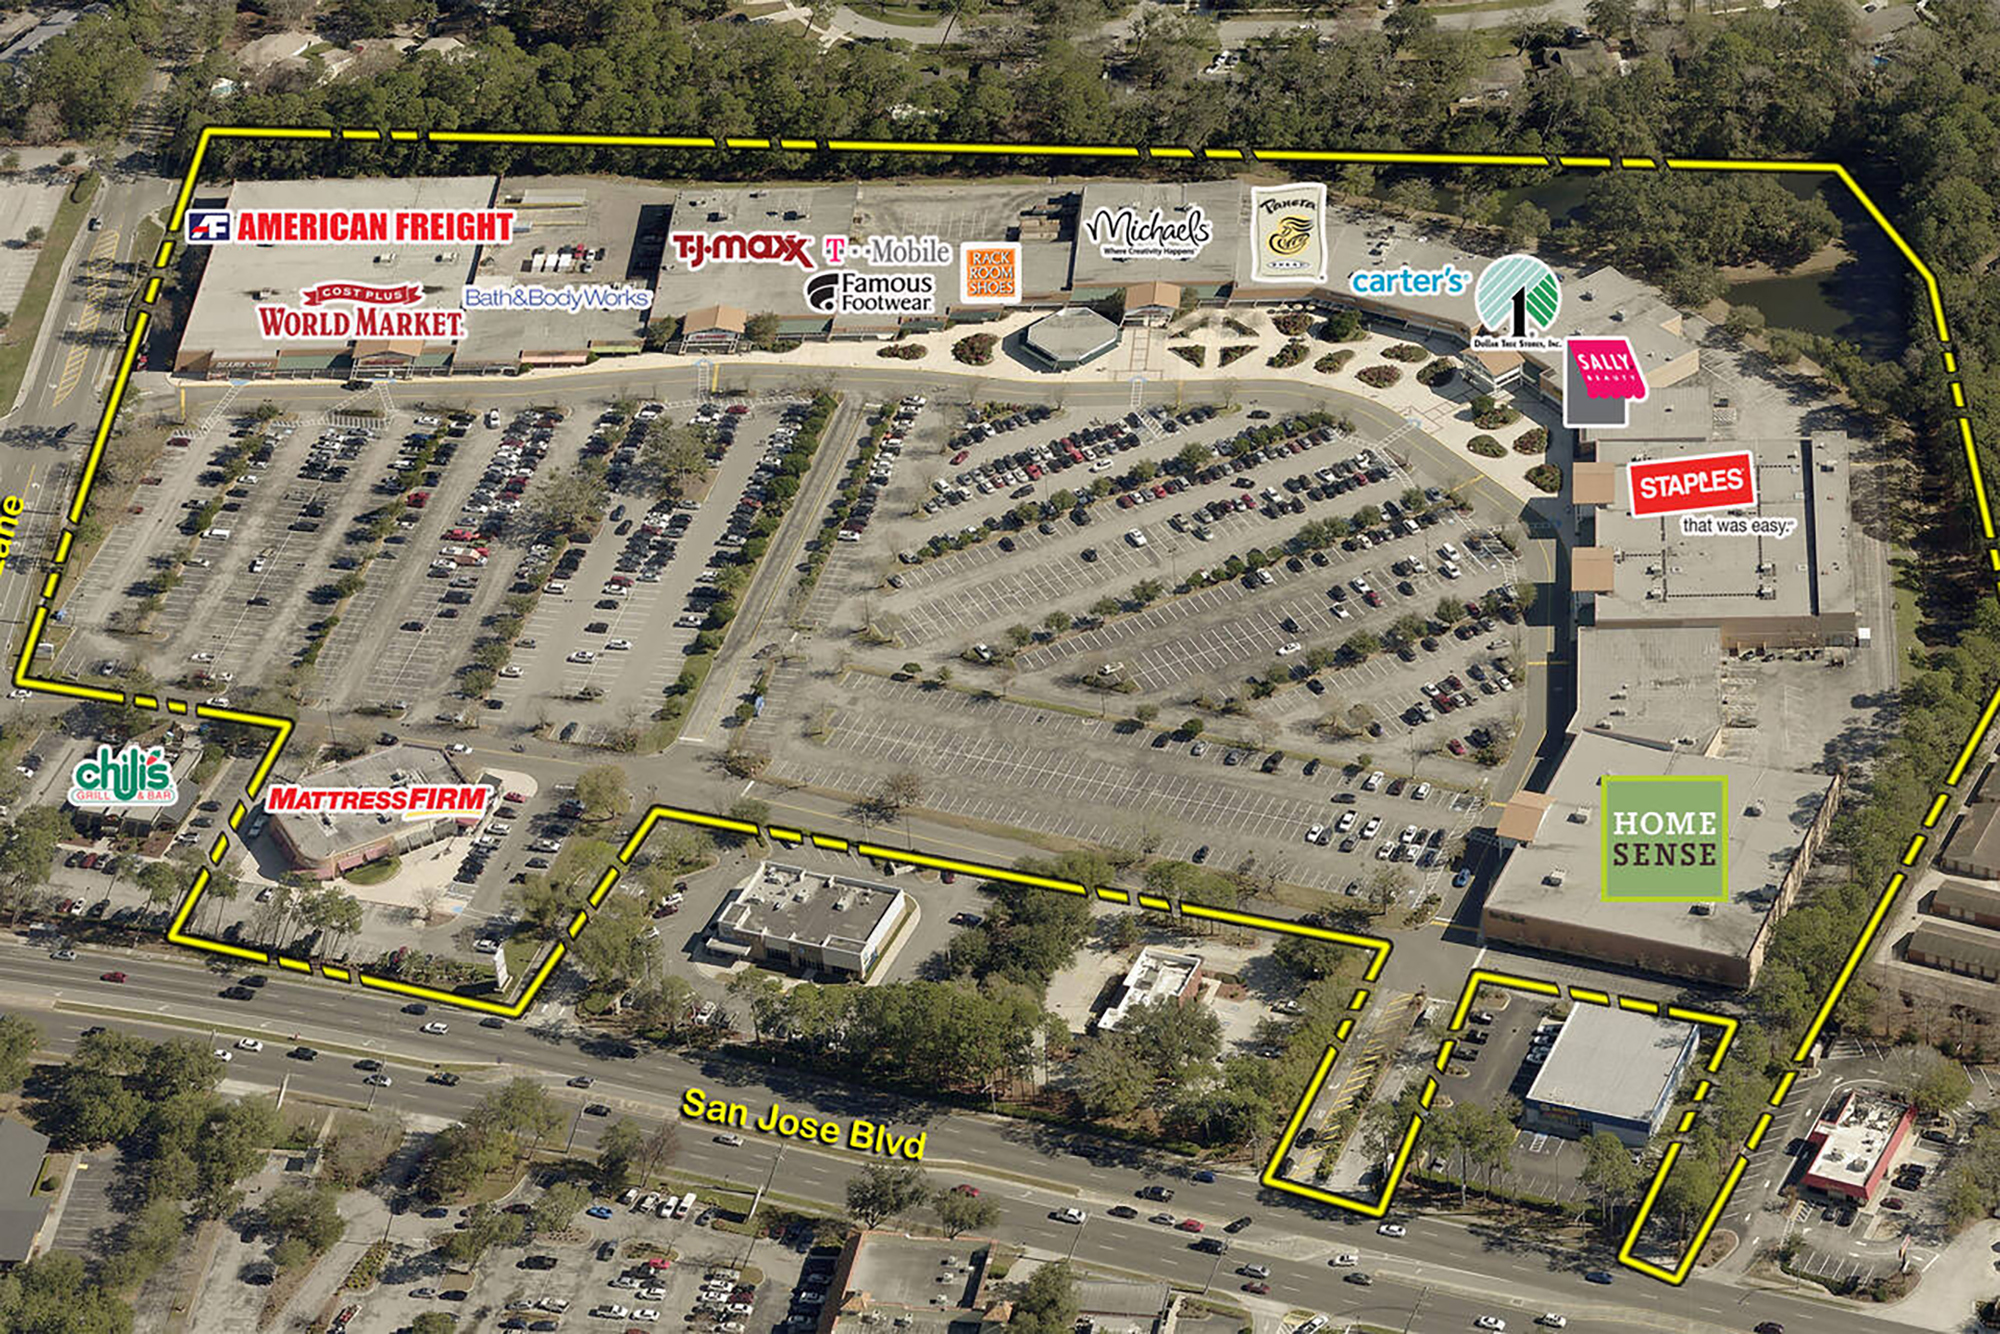 An aerial plan for Riverplace Shopping Center by landlord Kimco Realty shows HomeSense in the former Stein Mart store.